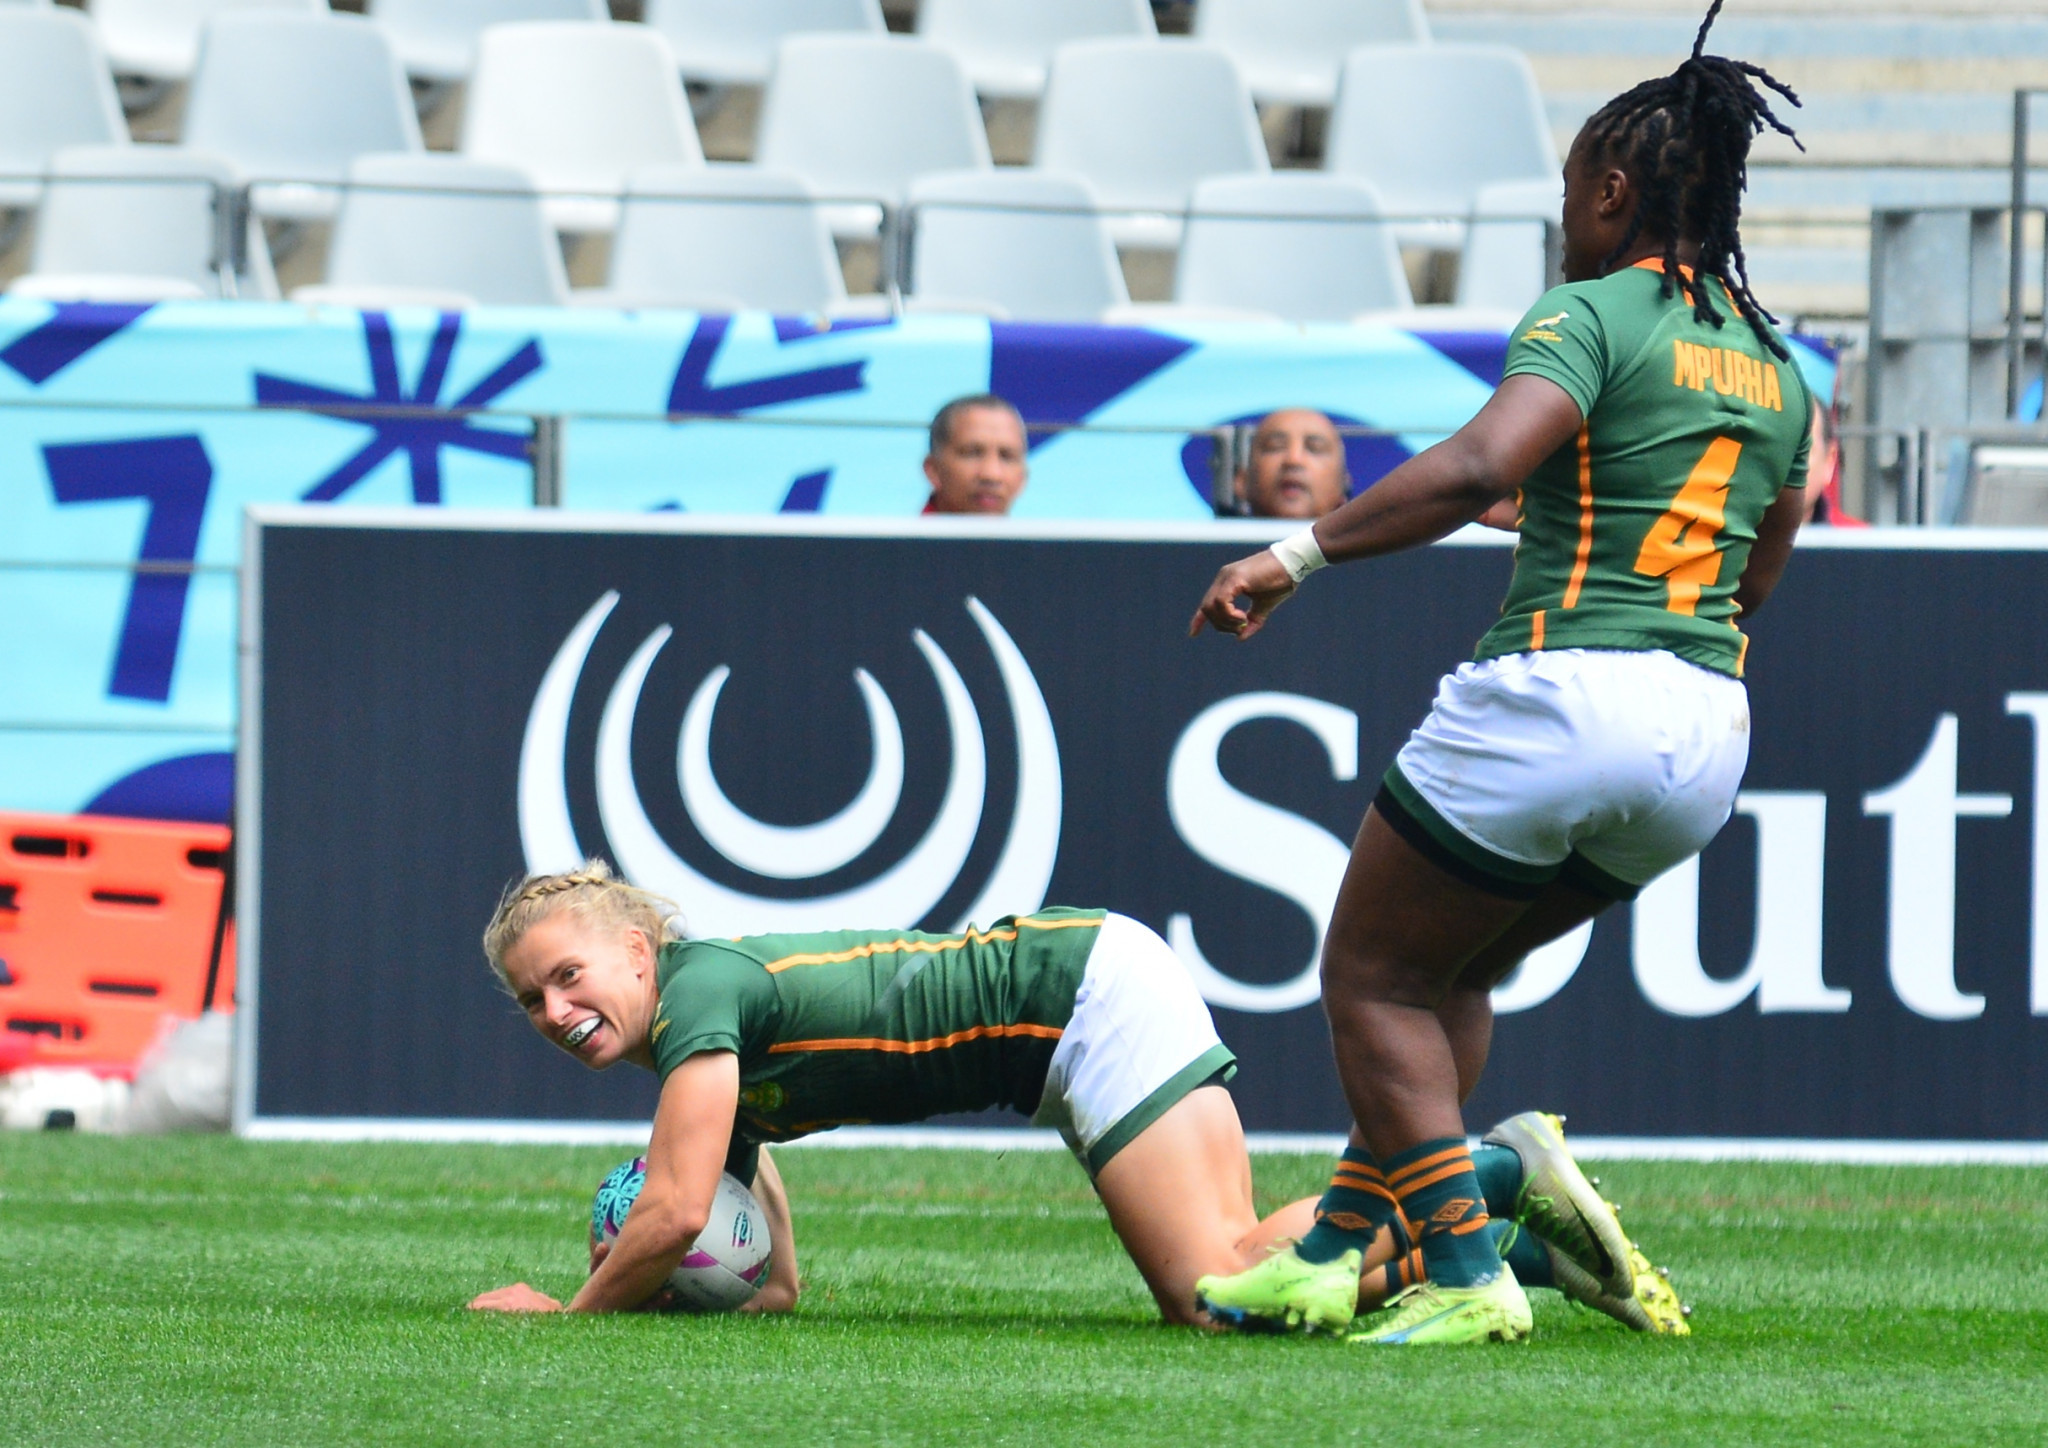 Nadine Roos was among South Africa's try scorers as they earned a Paris 2024 place by winning the Africa Women's Sevens tournament ©Getty Images